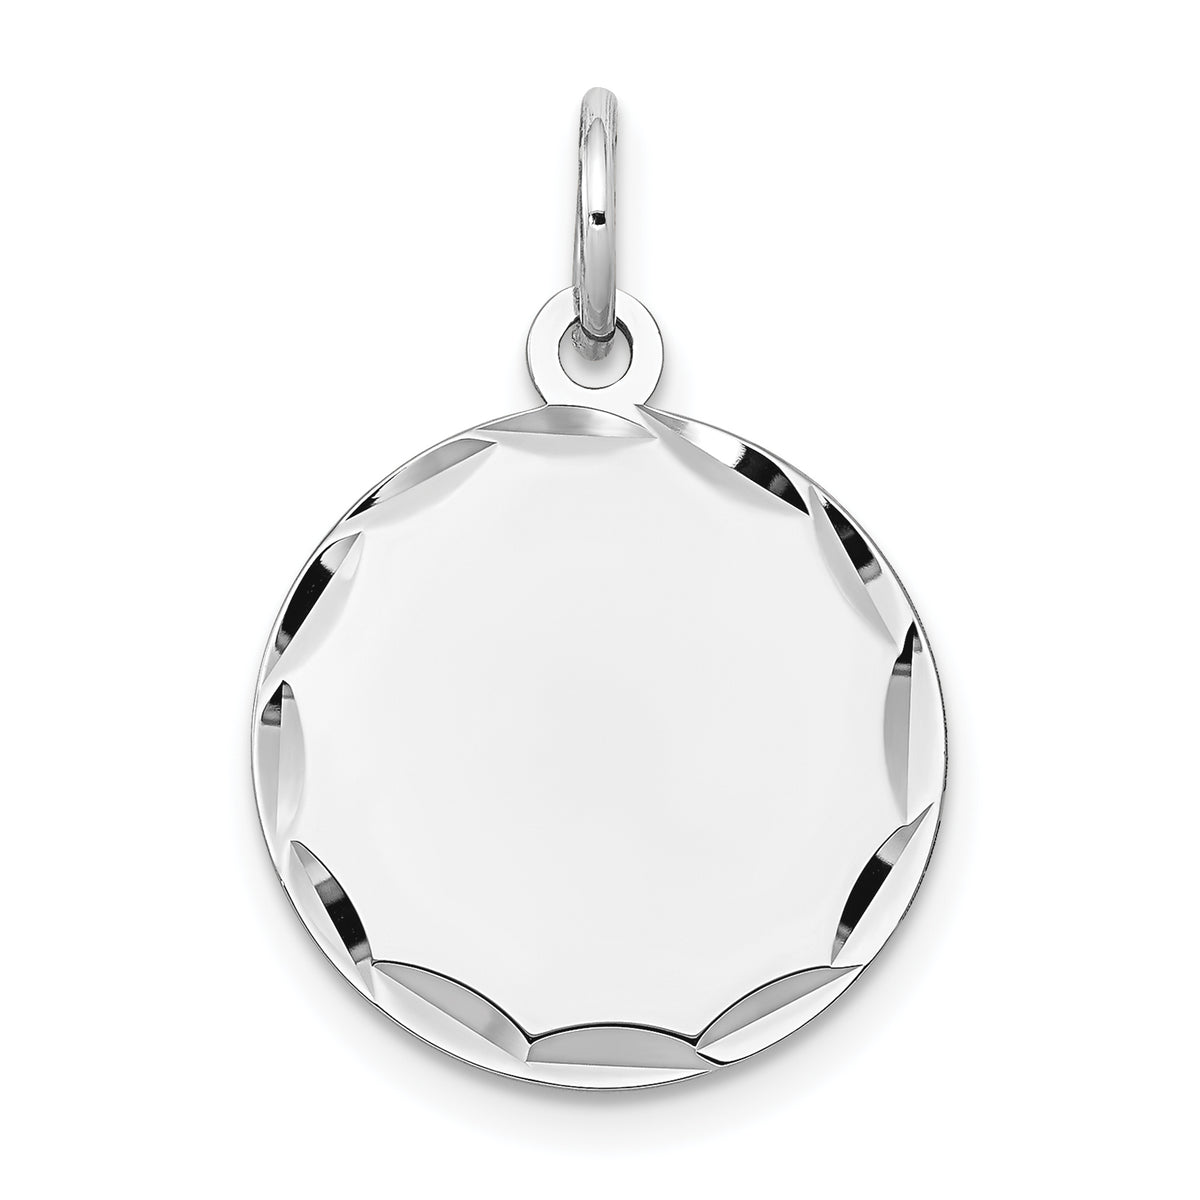 14K White Gold Etched .013 Gauge Engraveable Round Disc Charm